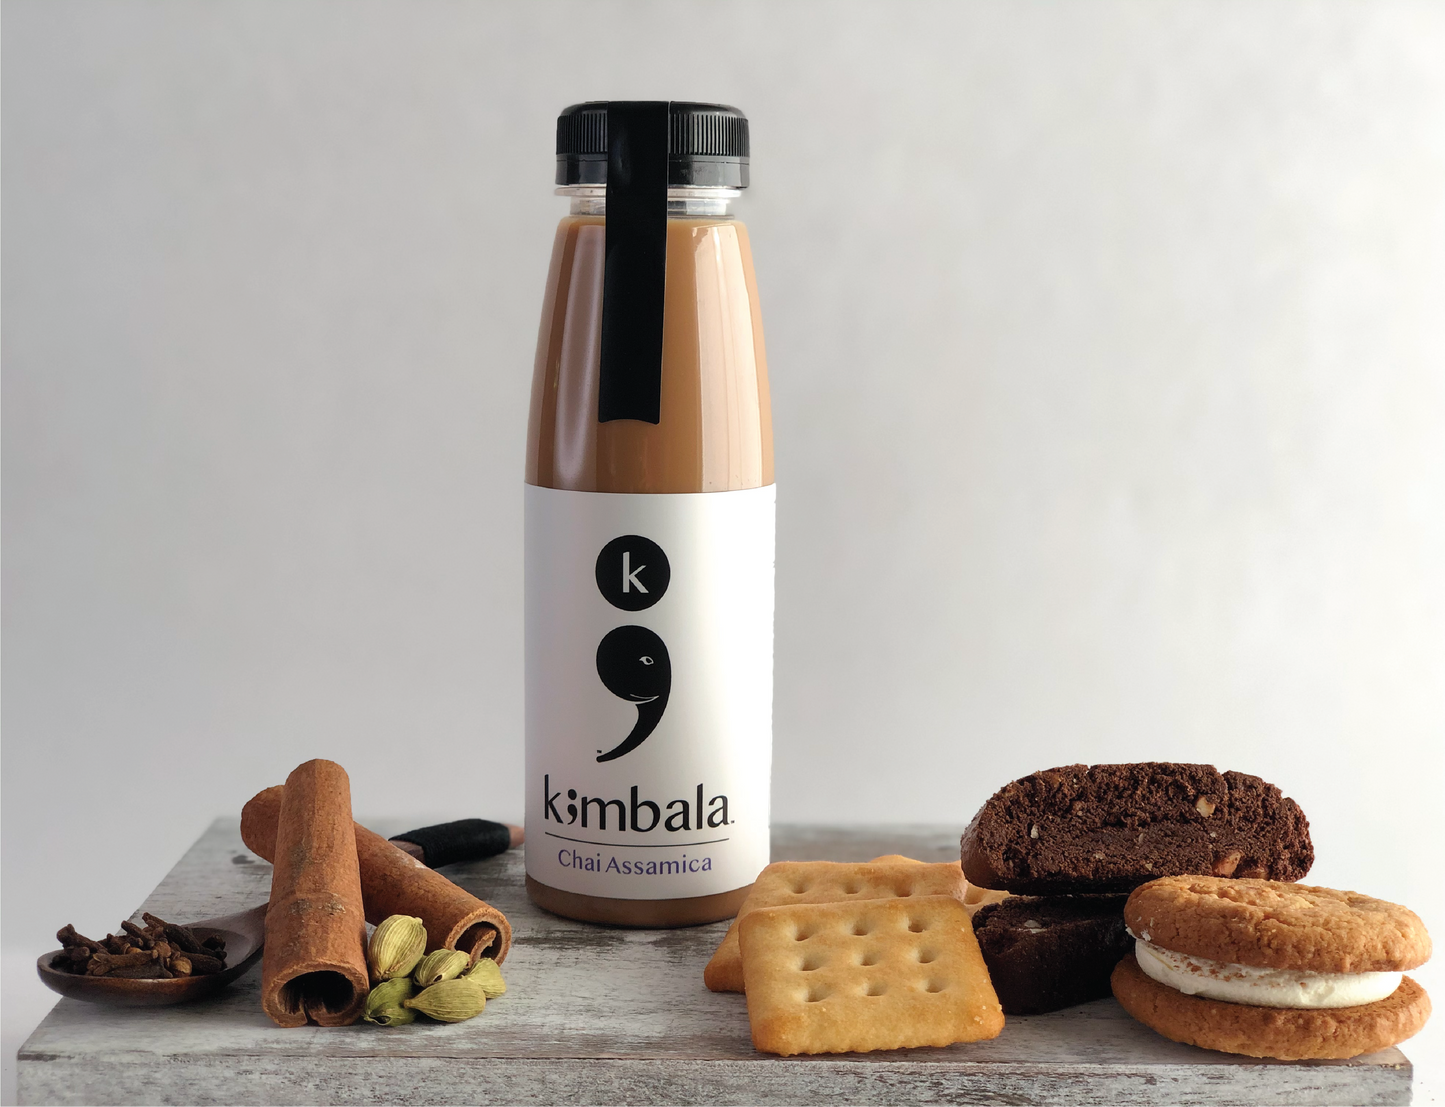 Kimbala Chai Assamica, 10.2oz bottle, the best indian chai surrounded by crackers, biscotti, a cream filled cookie, cinnamon sticks, cardamom pods and cloves on a small wooden spoon